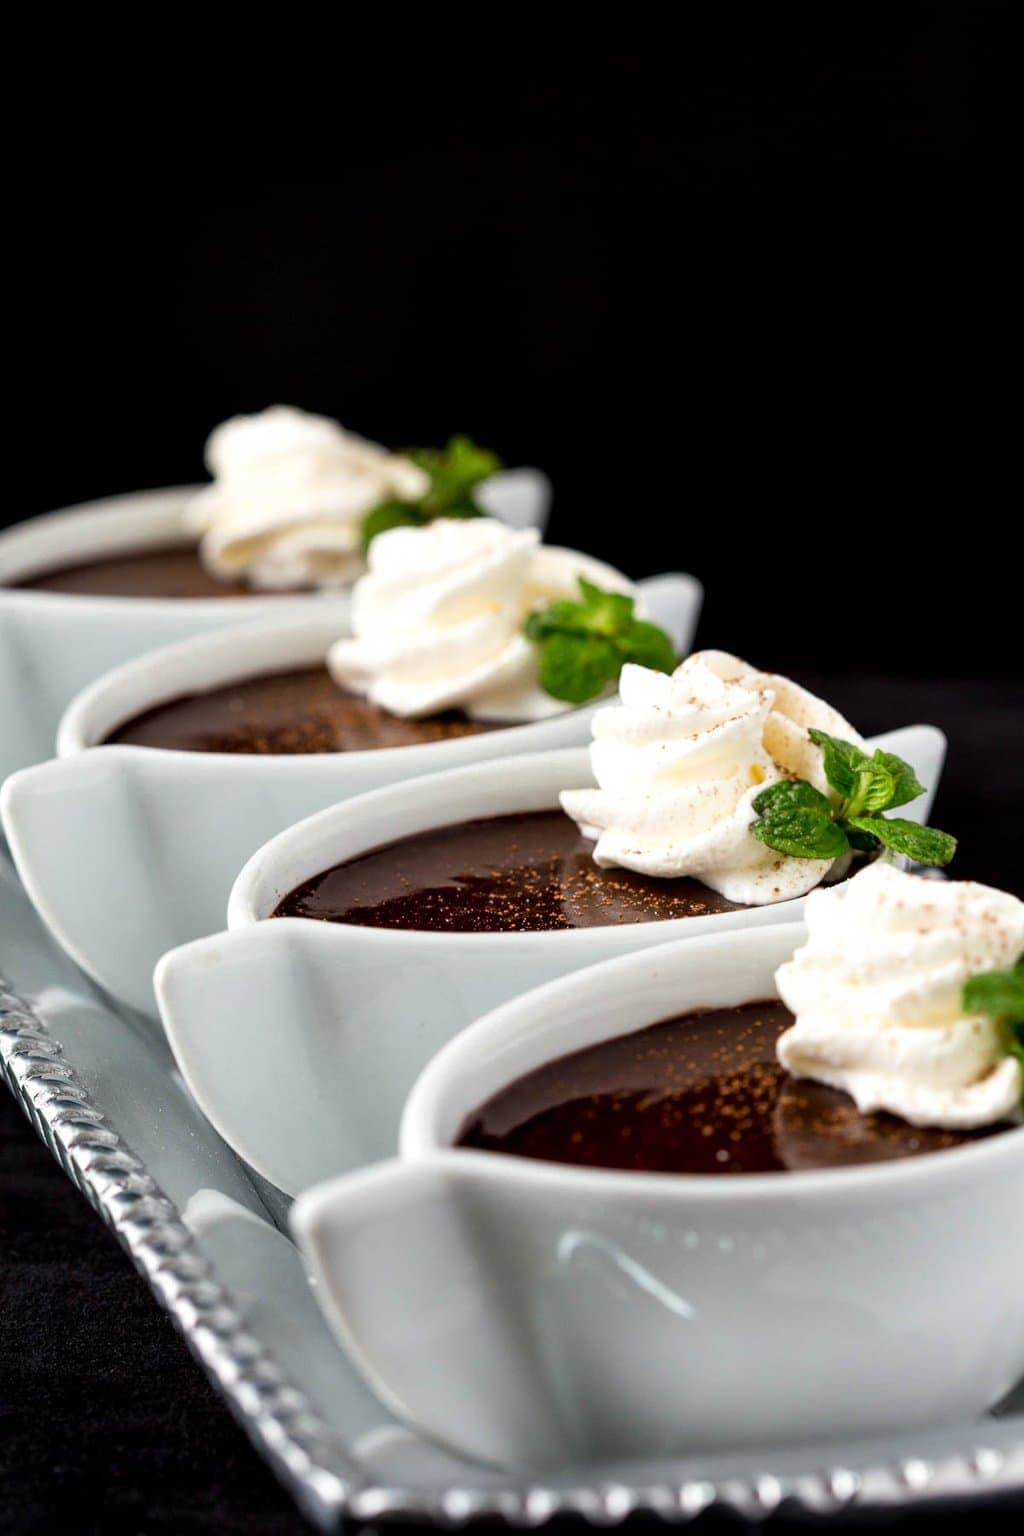 Vertical closeup photo of Blender Chocolate Pots de Crème in small white dessert dishes garnished with whipped cream and a sprig of fresh mint.